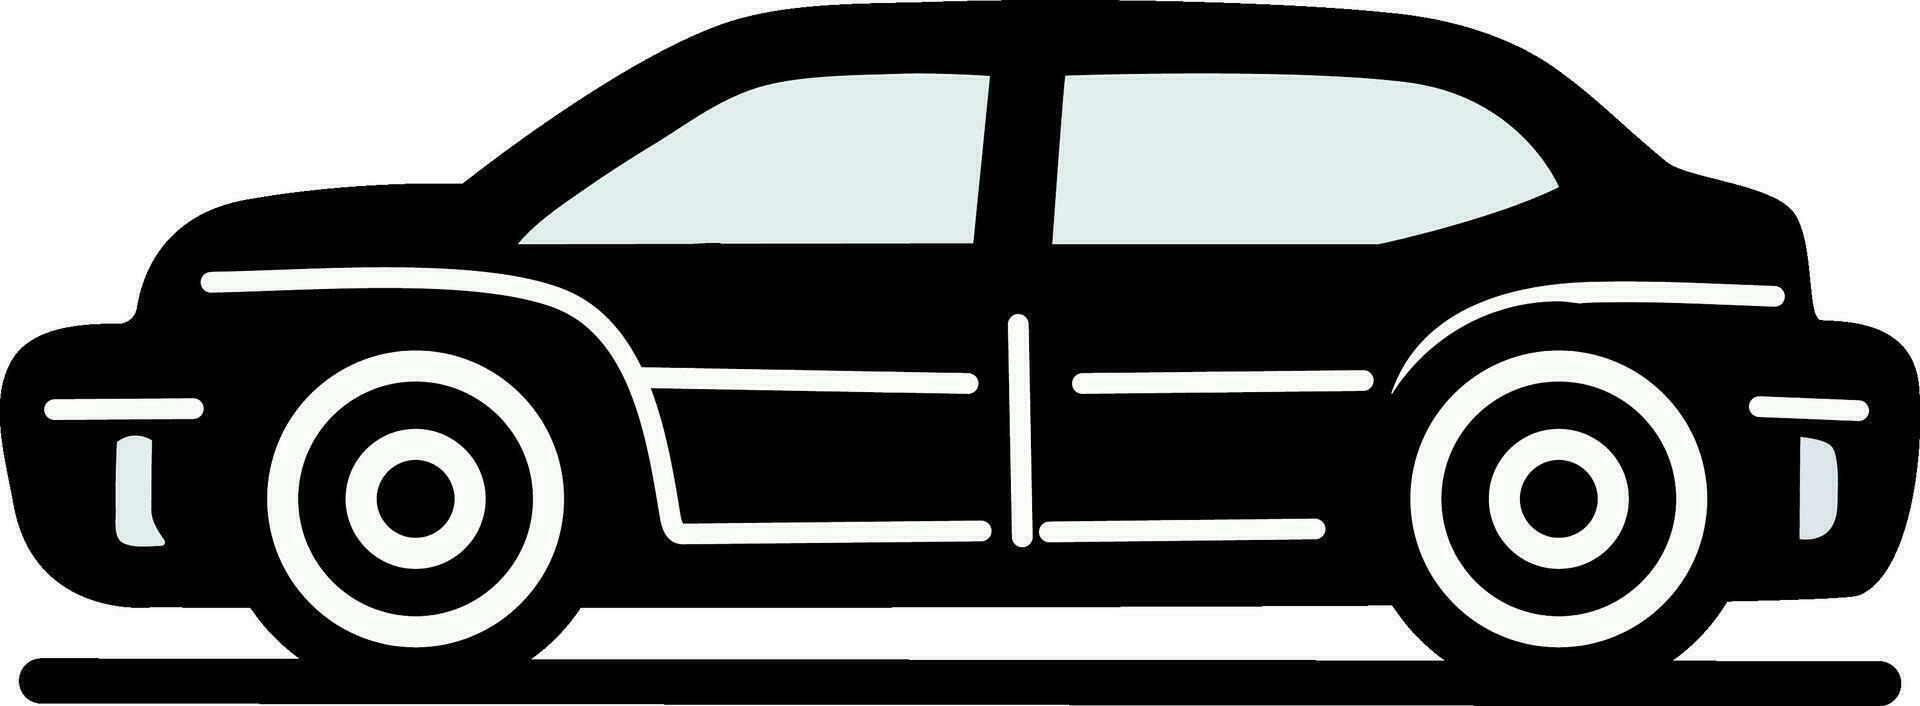 Isolated Black And White Car Icon In Flat Style. vector